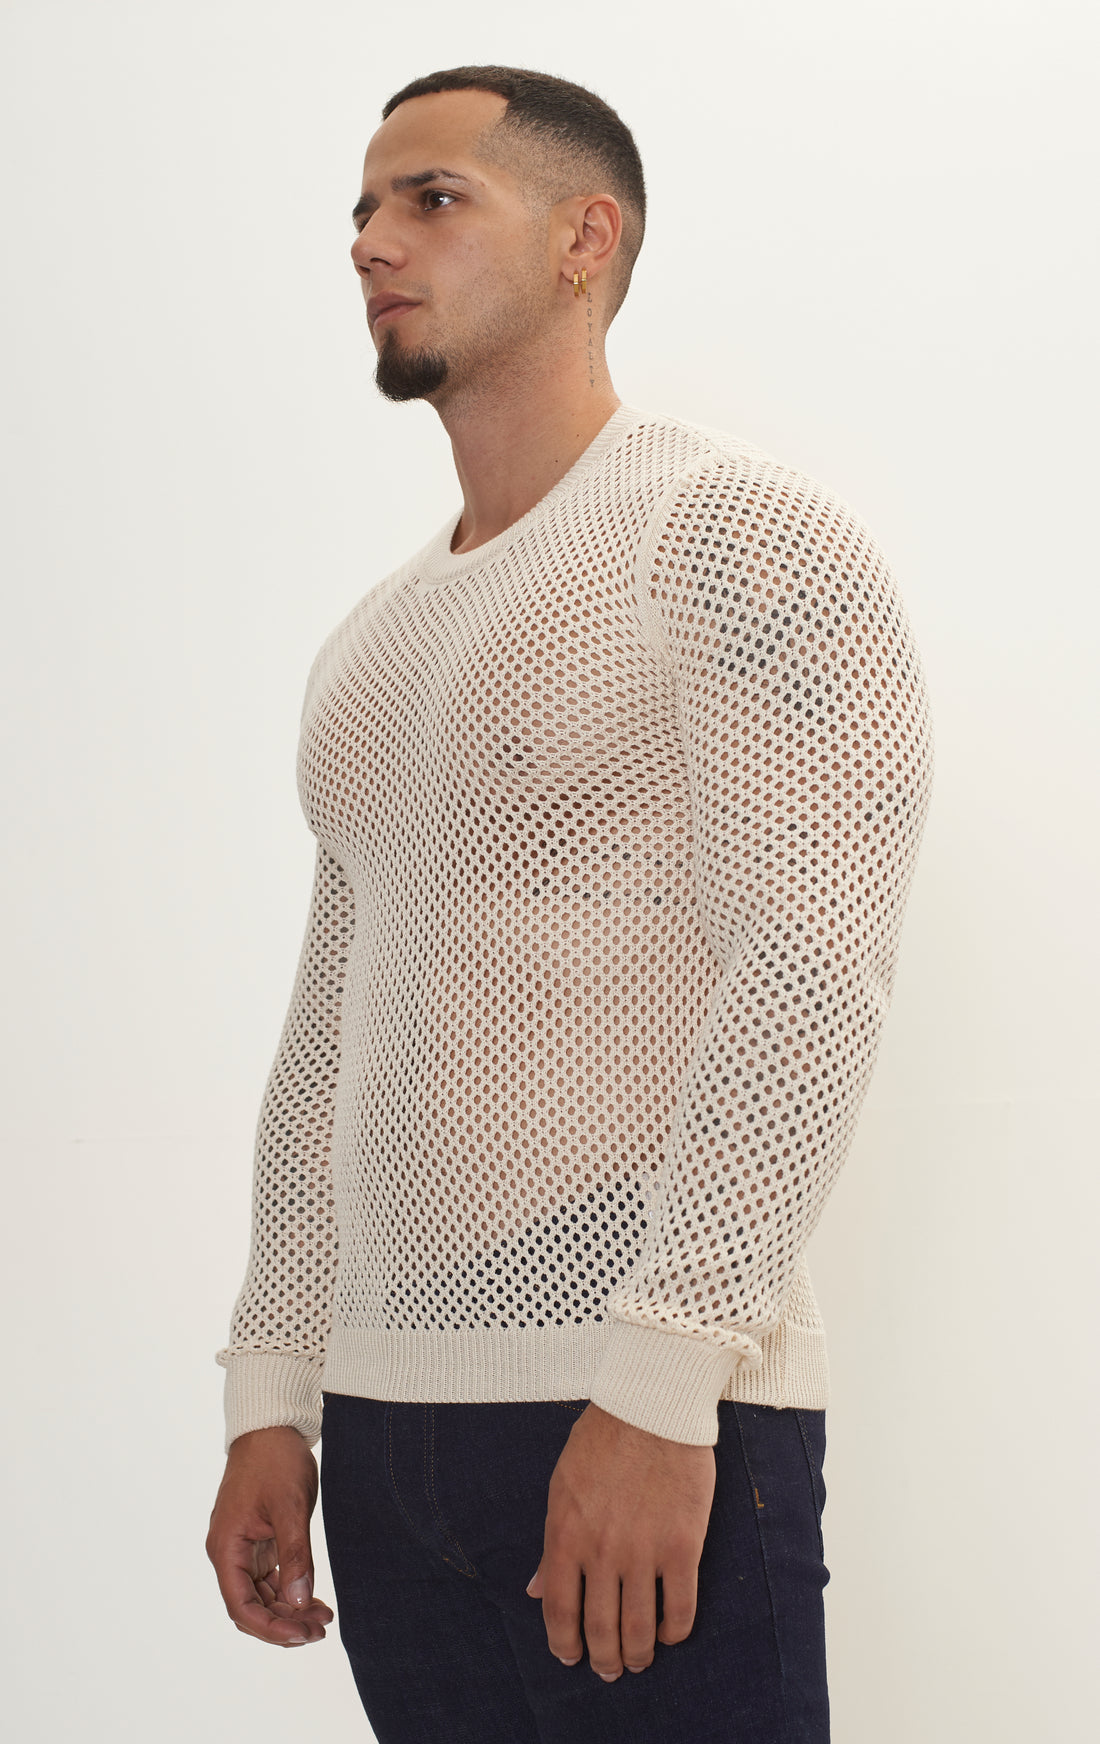 See Through Fishnet Muscle Fit Shirt - Beige